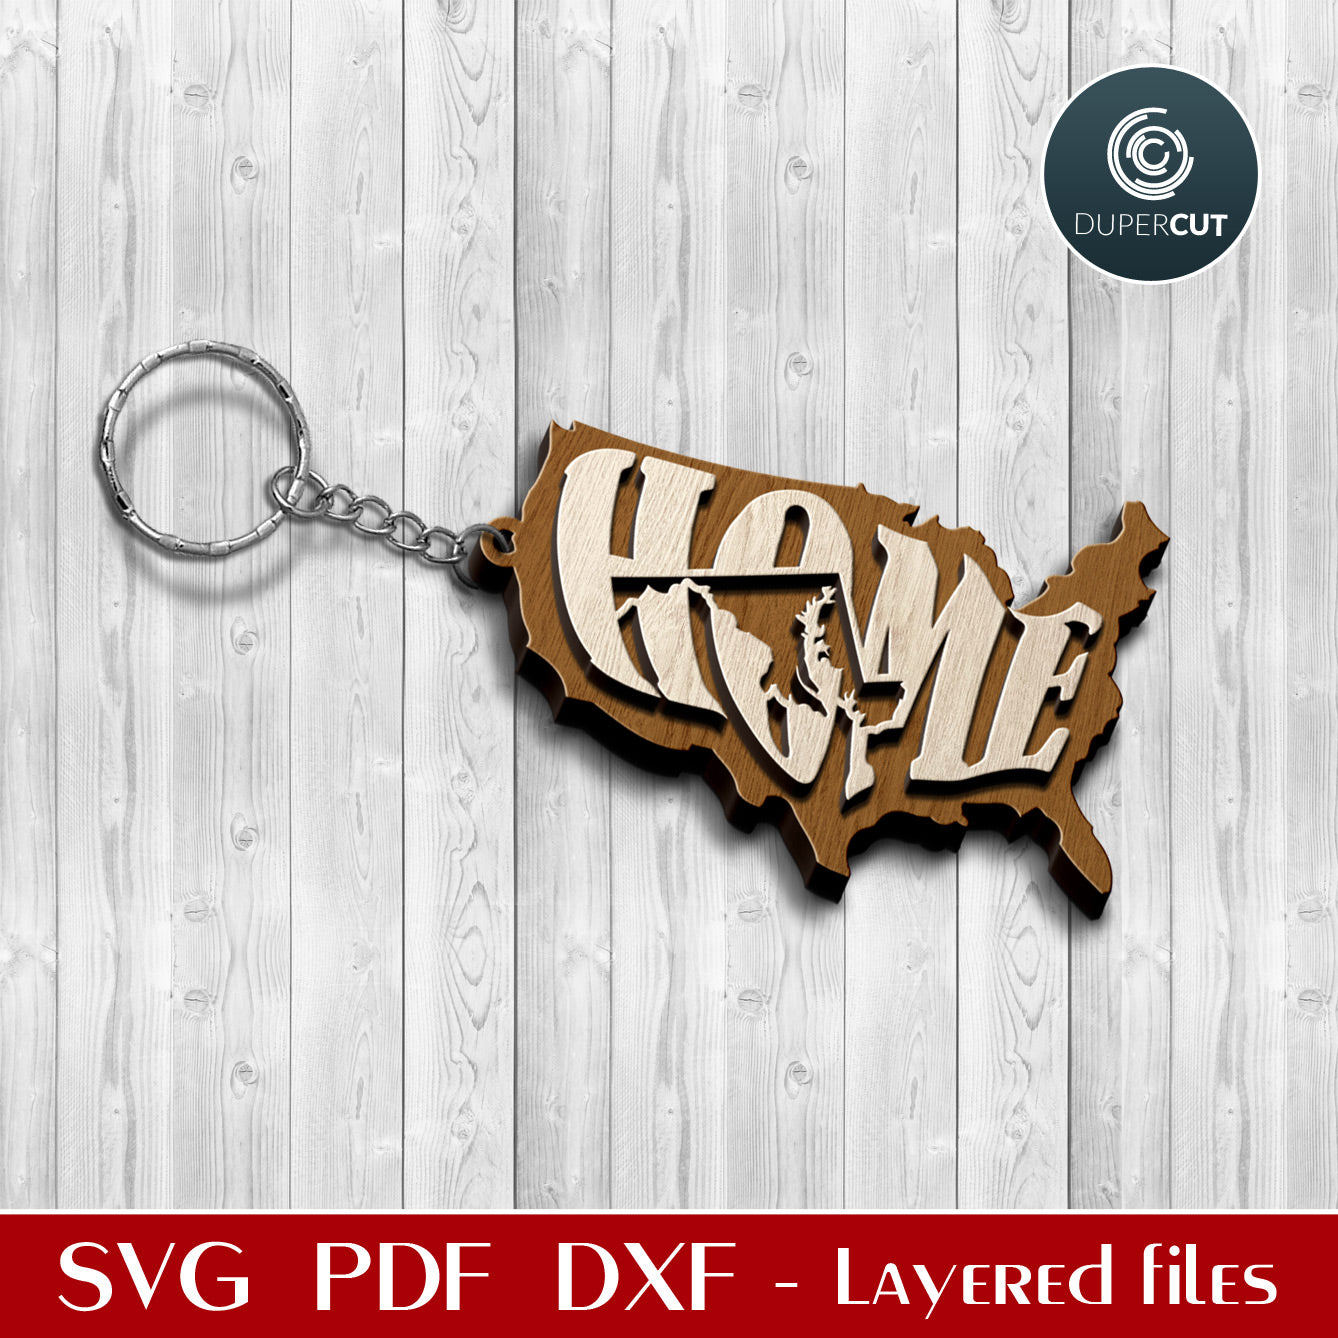 Map of the United States DIY keychains HOME design SVG layered cutting files for Glowfroge, Cricut, Silhouette, CNC plasma machines by DuperCut.com